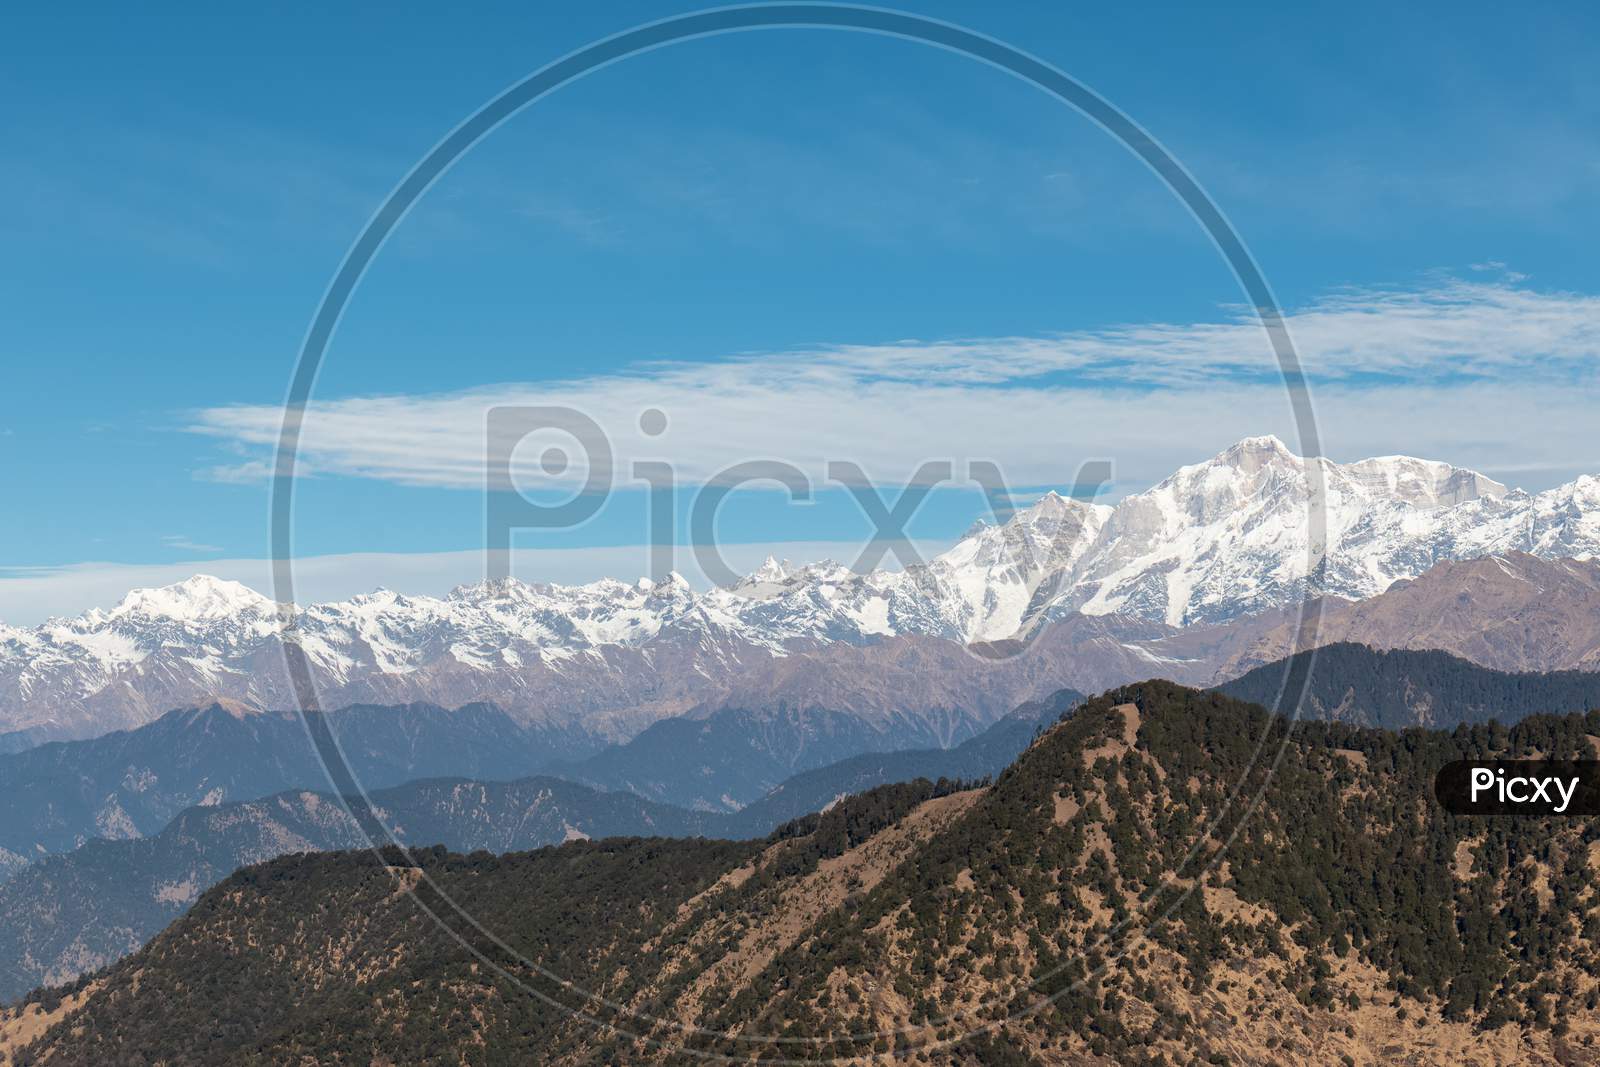 Landscape of Snow covered Mountains